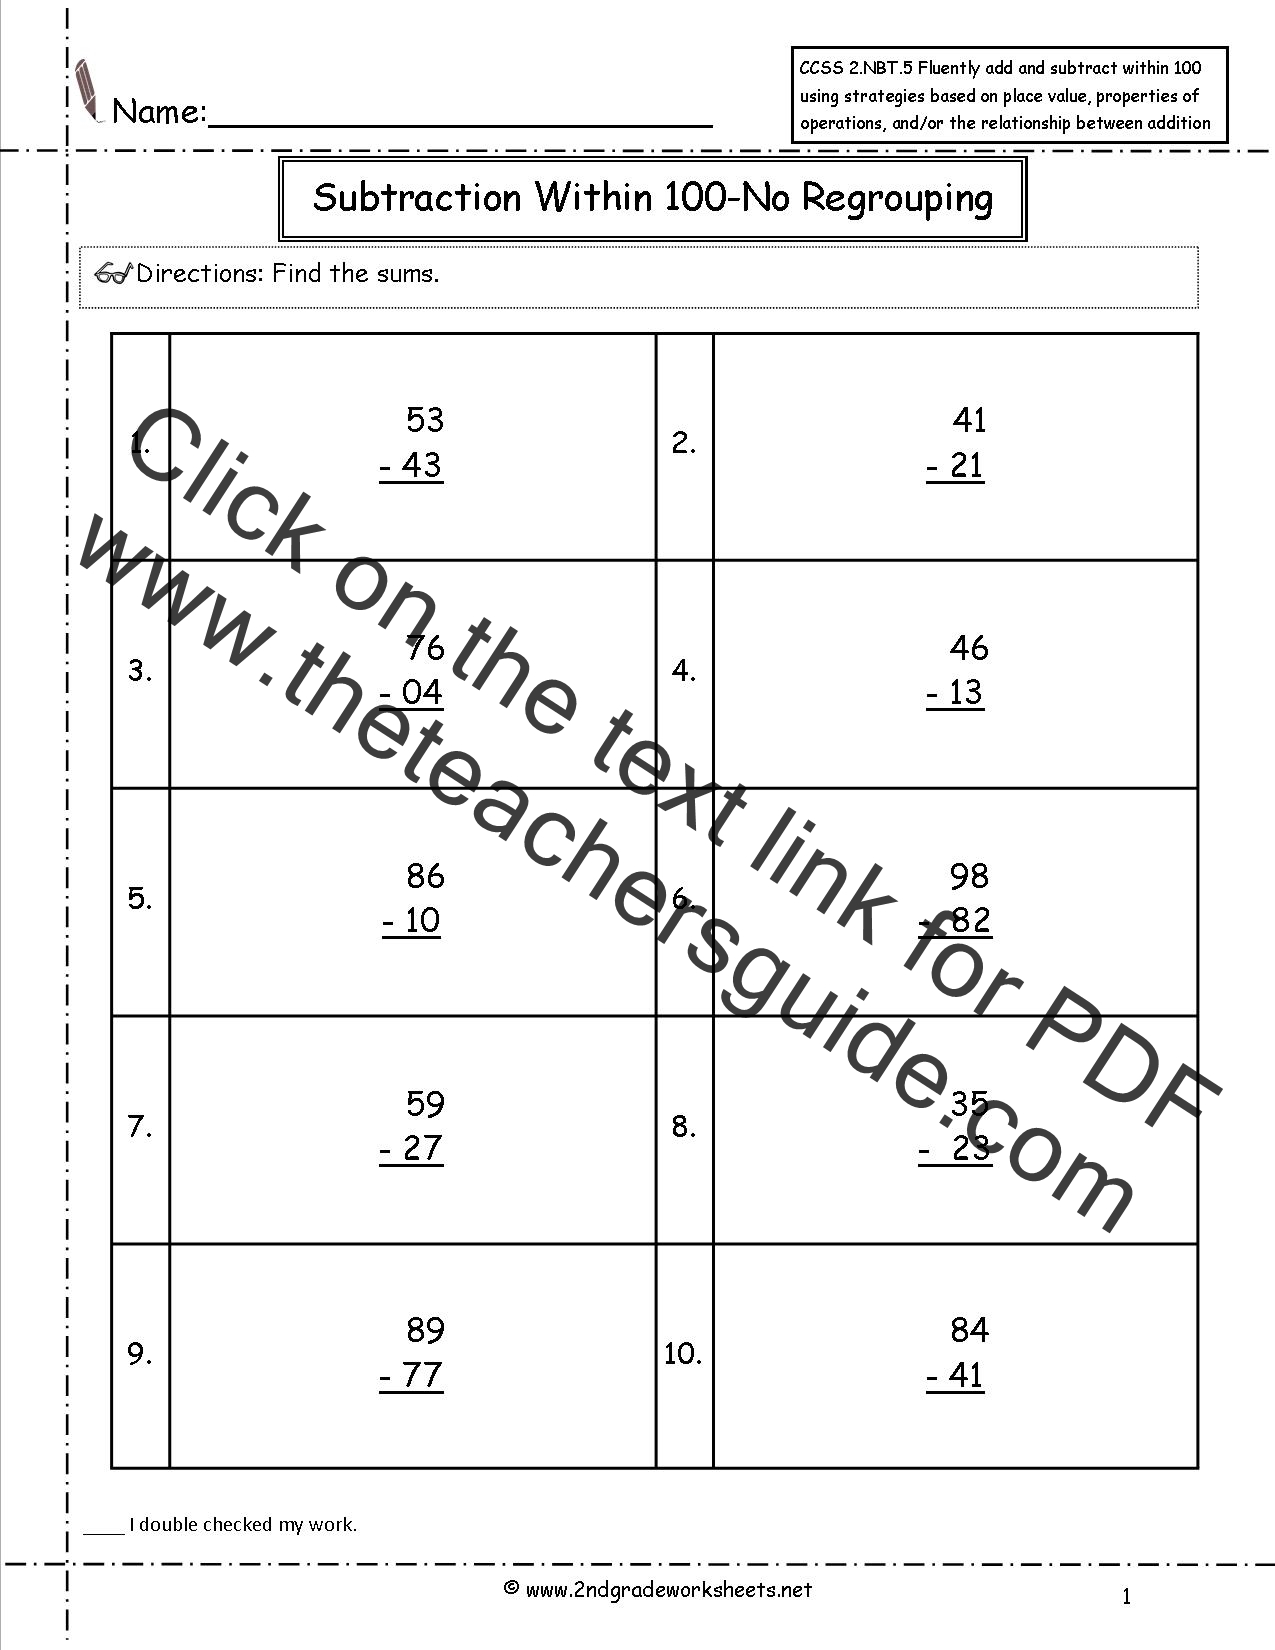 CCSS 2.NBT.5 Worksheets. Two Digit Addition and Subtraction Within 100